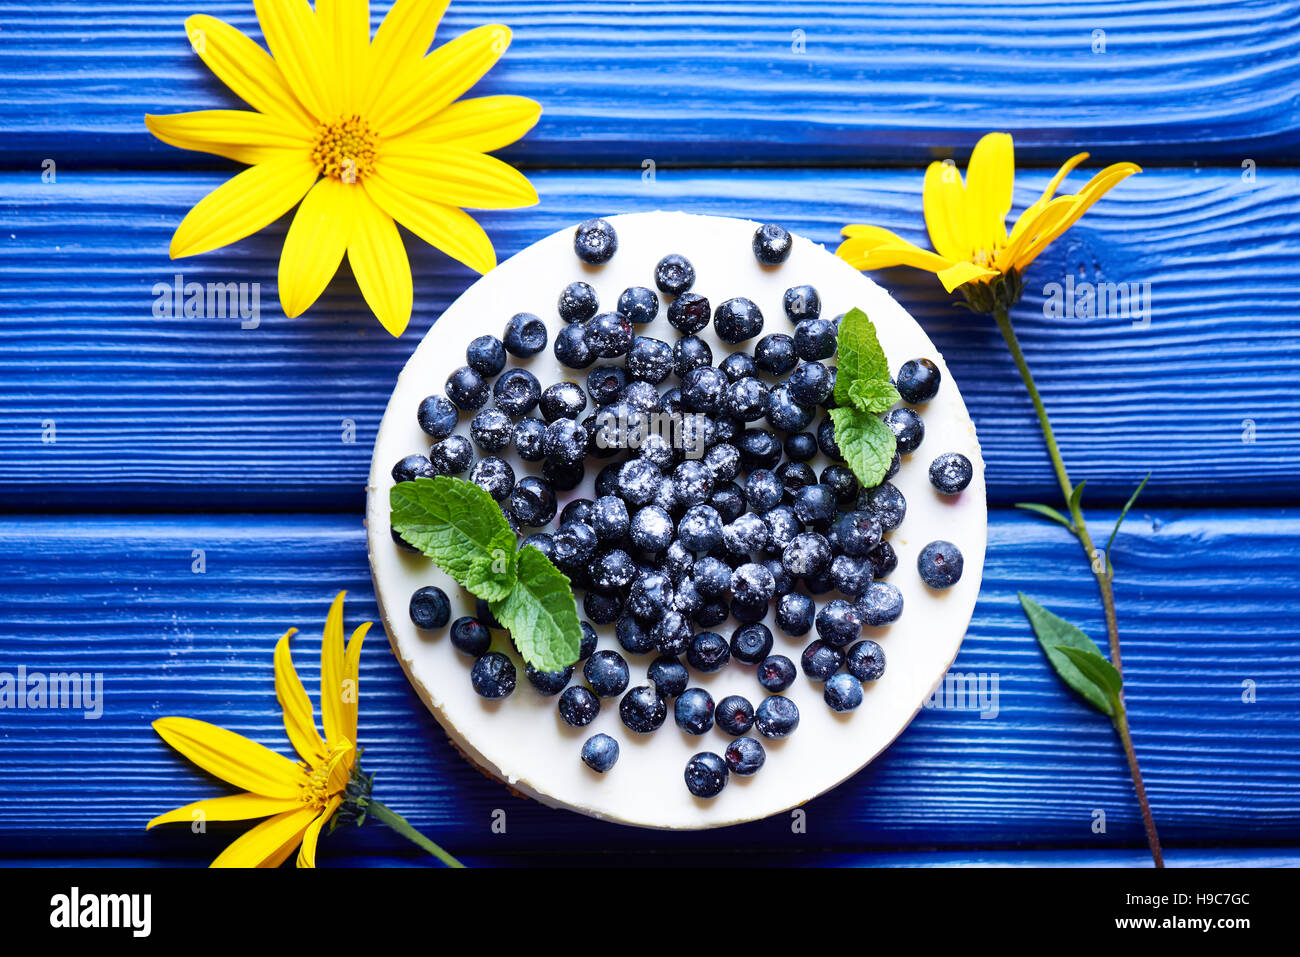 Sweet creamy blueberry cheesecake with fresh blue berries on a blue wooden background with yellow flowers. top view. Stock Photo